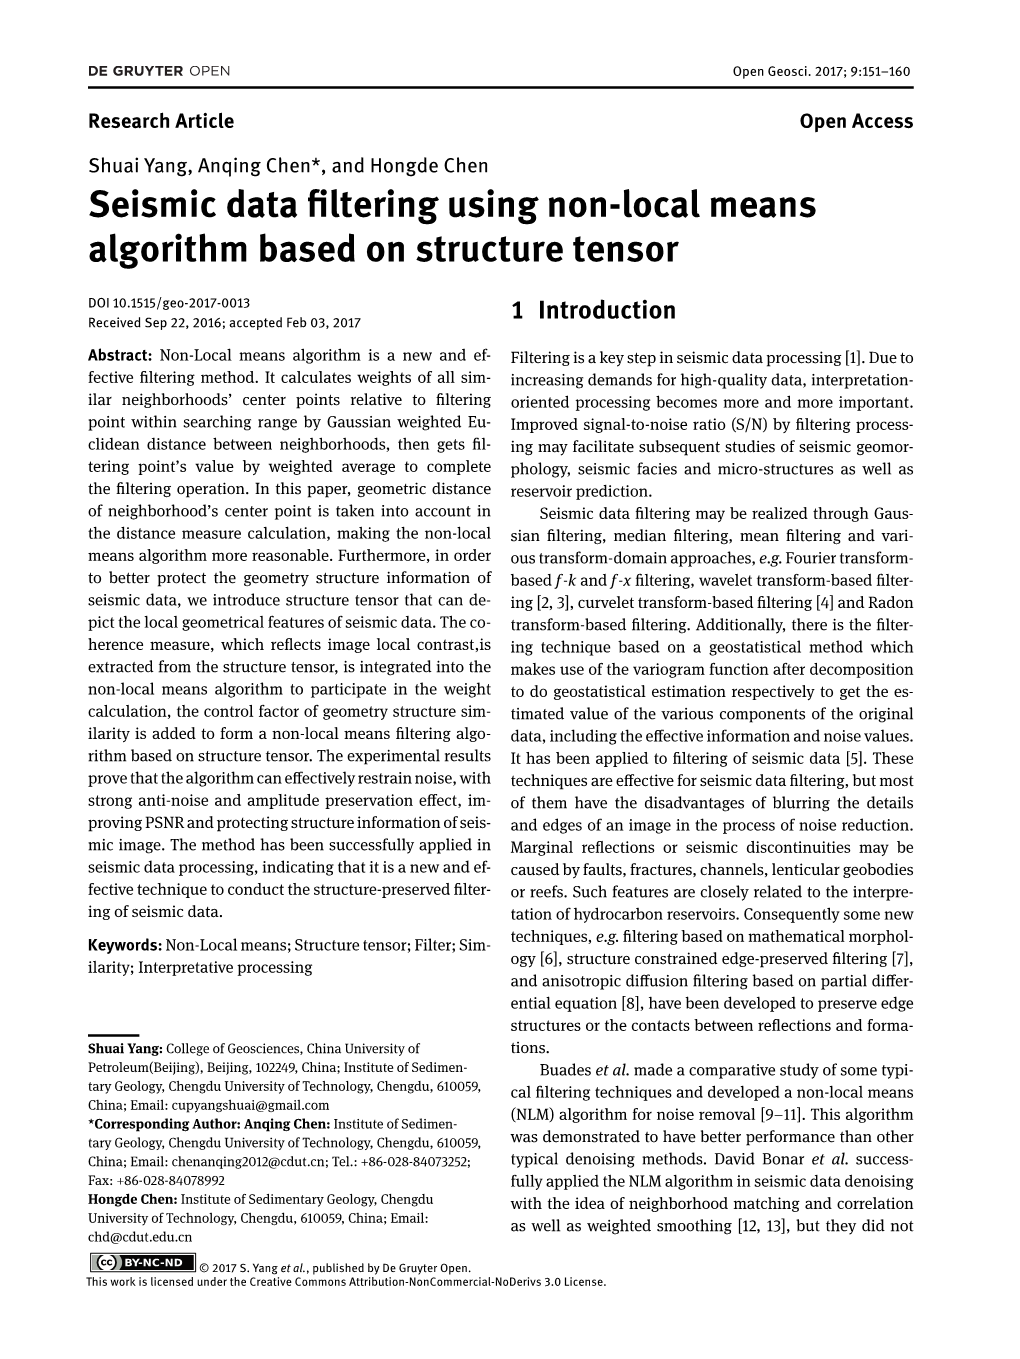 Seismic Data Filtering Using Non-Local Means Algorithm Based on Structure Tensor